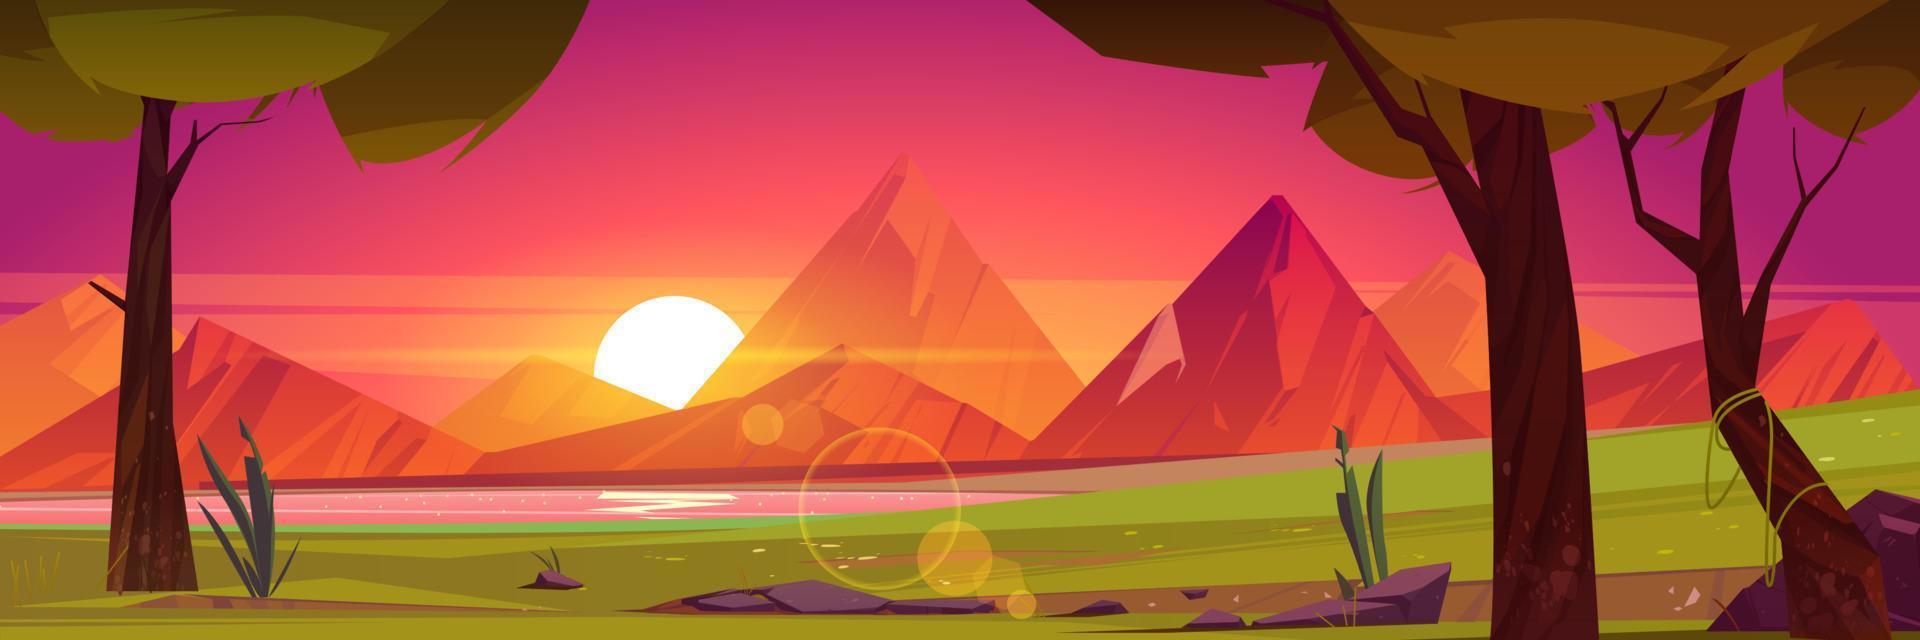 Summer landscape with mountains and lake at sunset vector